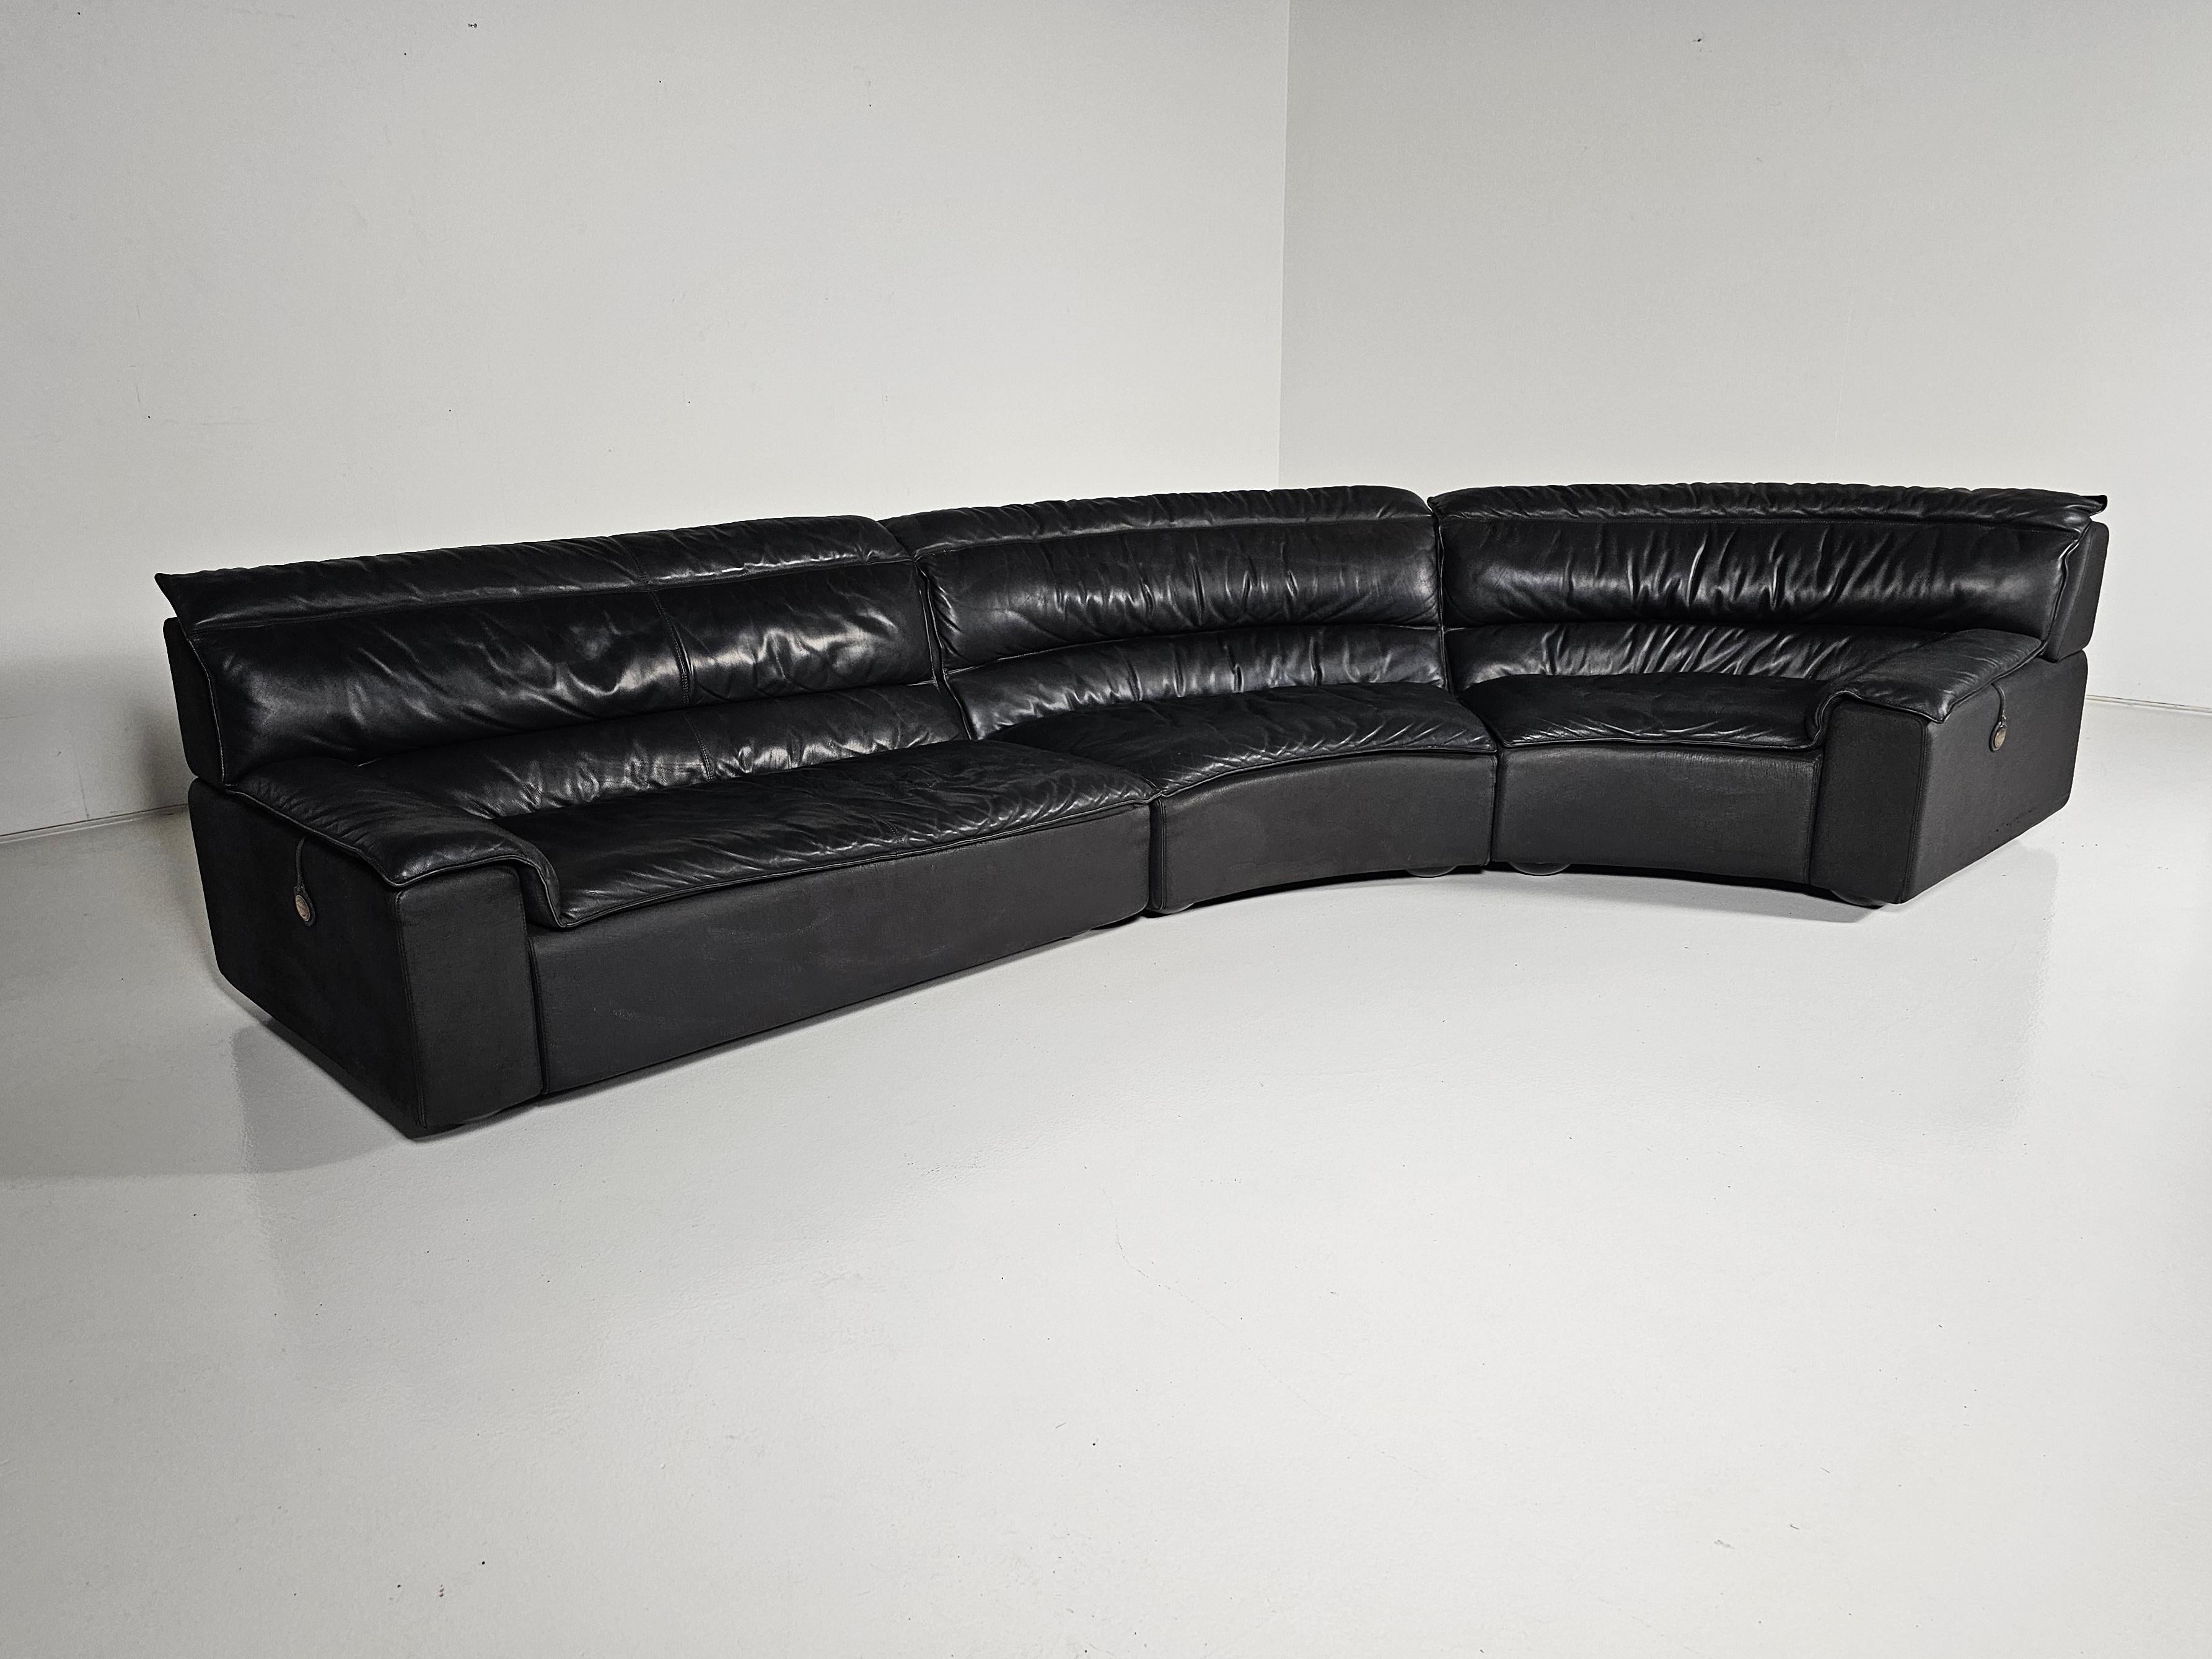 Carlo Bartoli for Rossi di Albizzate, modular 'Bogo' sofa, leather, Italy, 1976

This seating system consists of three elements. Maximum comfort is guaranteed using the thick seating cushions and the large seats

Carlo Bartoli (Milan, 1931-) is an